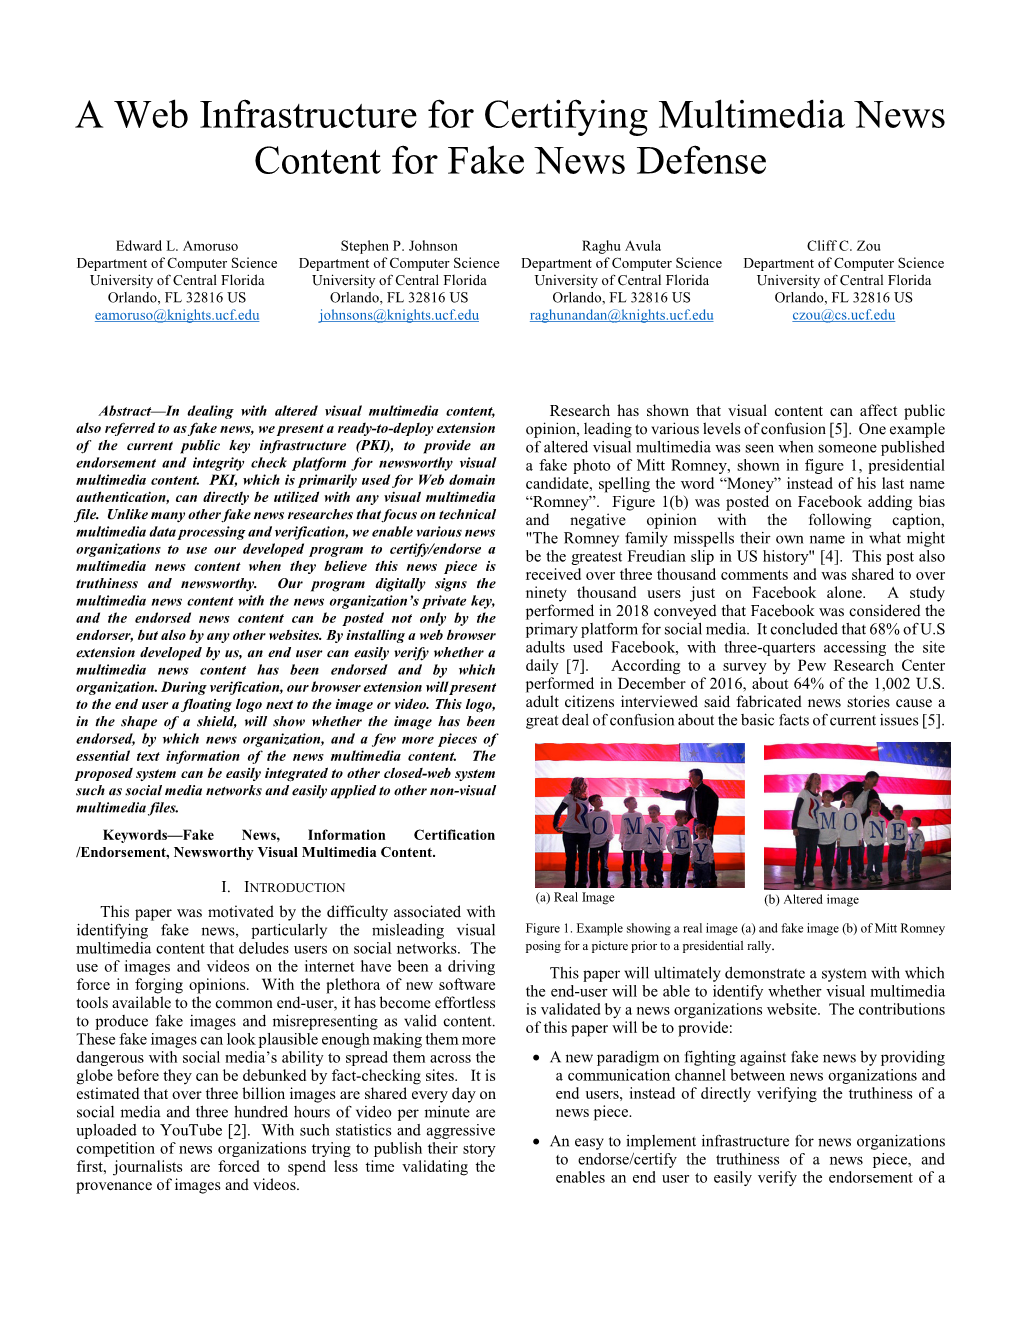 A Web Infrastructure for Certifying Multimedia News Content for Fake News Defense